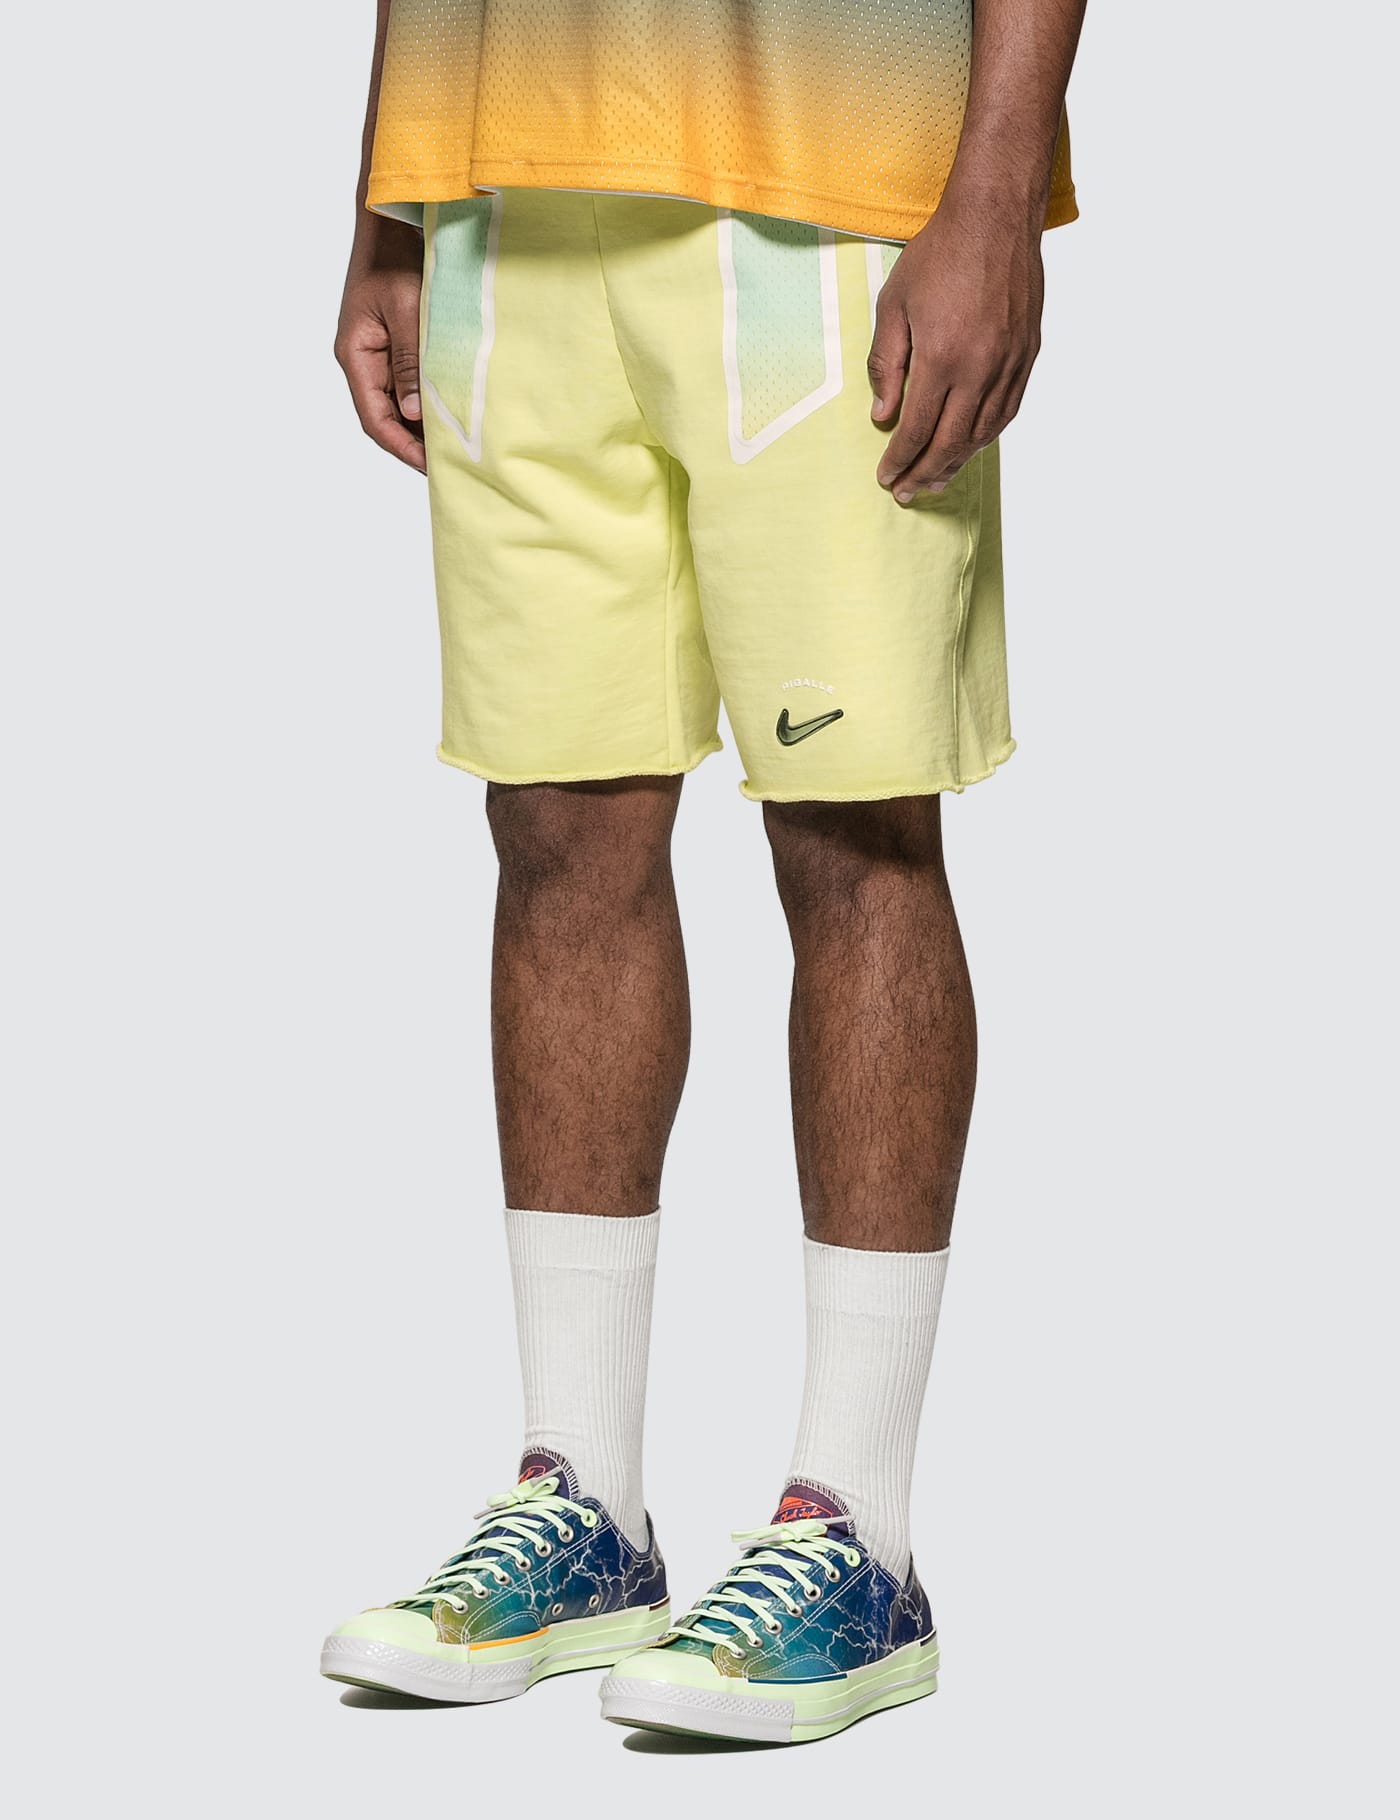 pigalle nike shorts